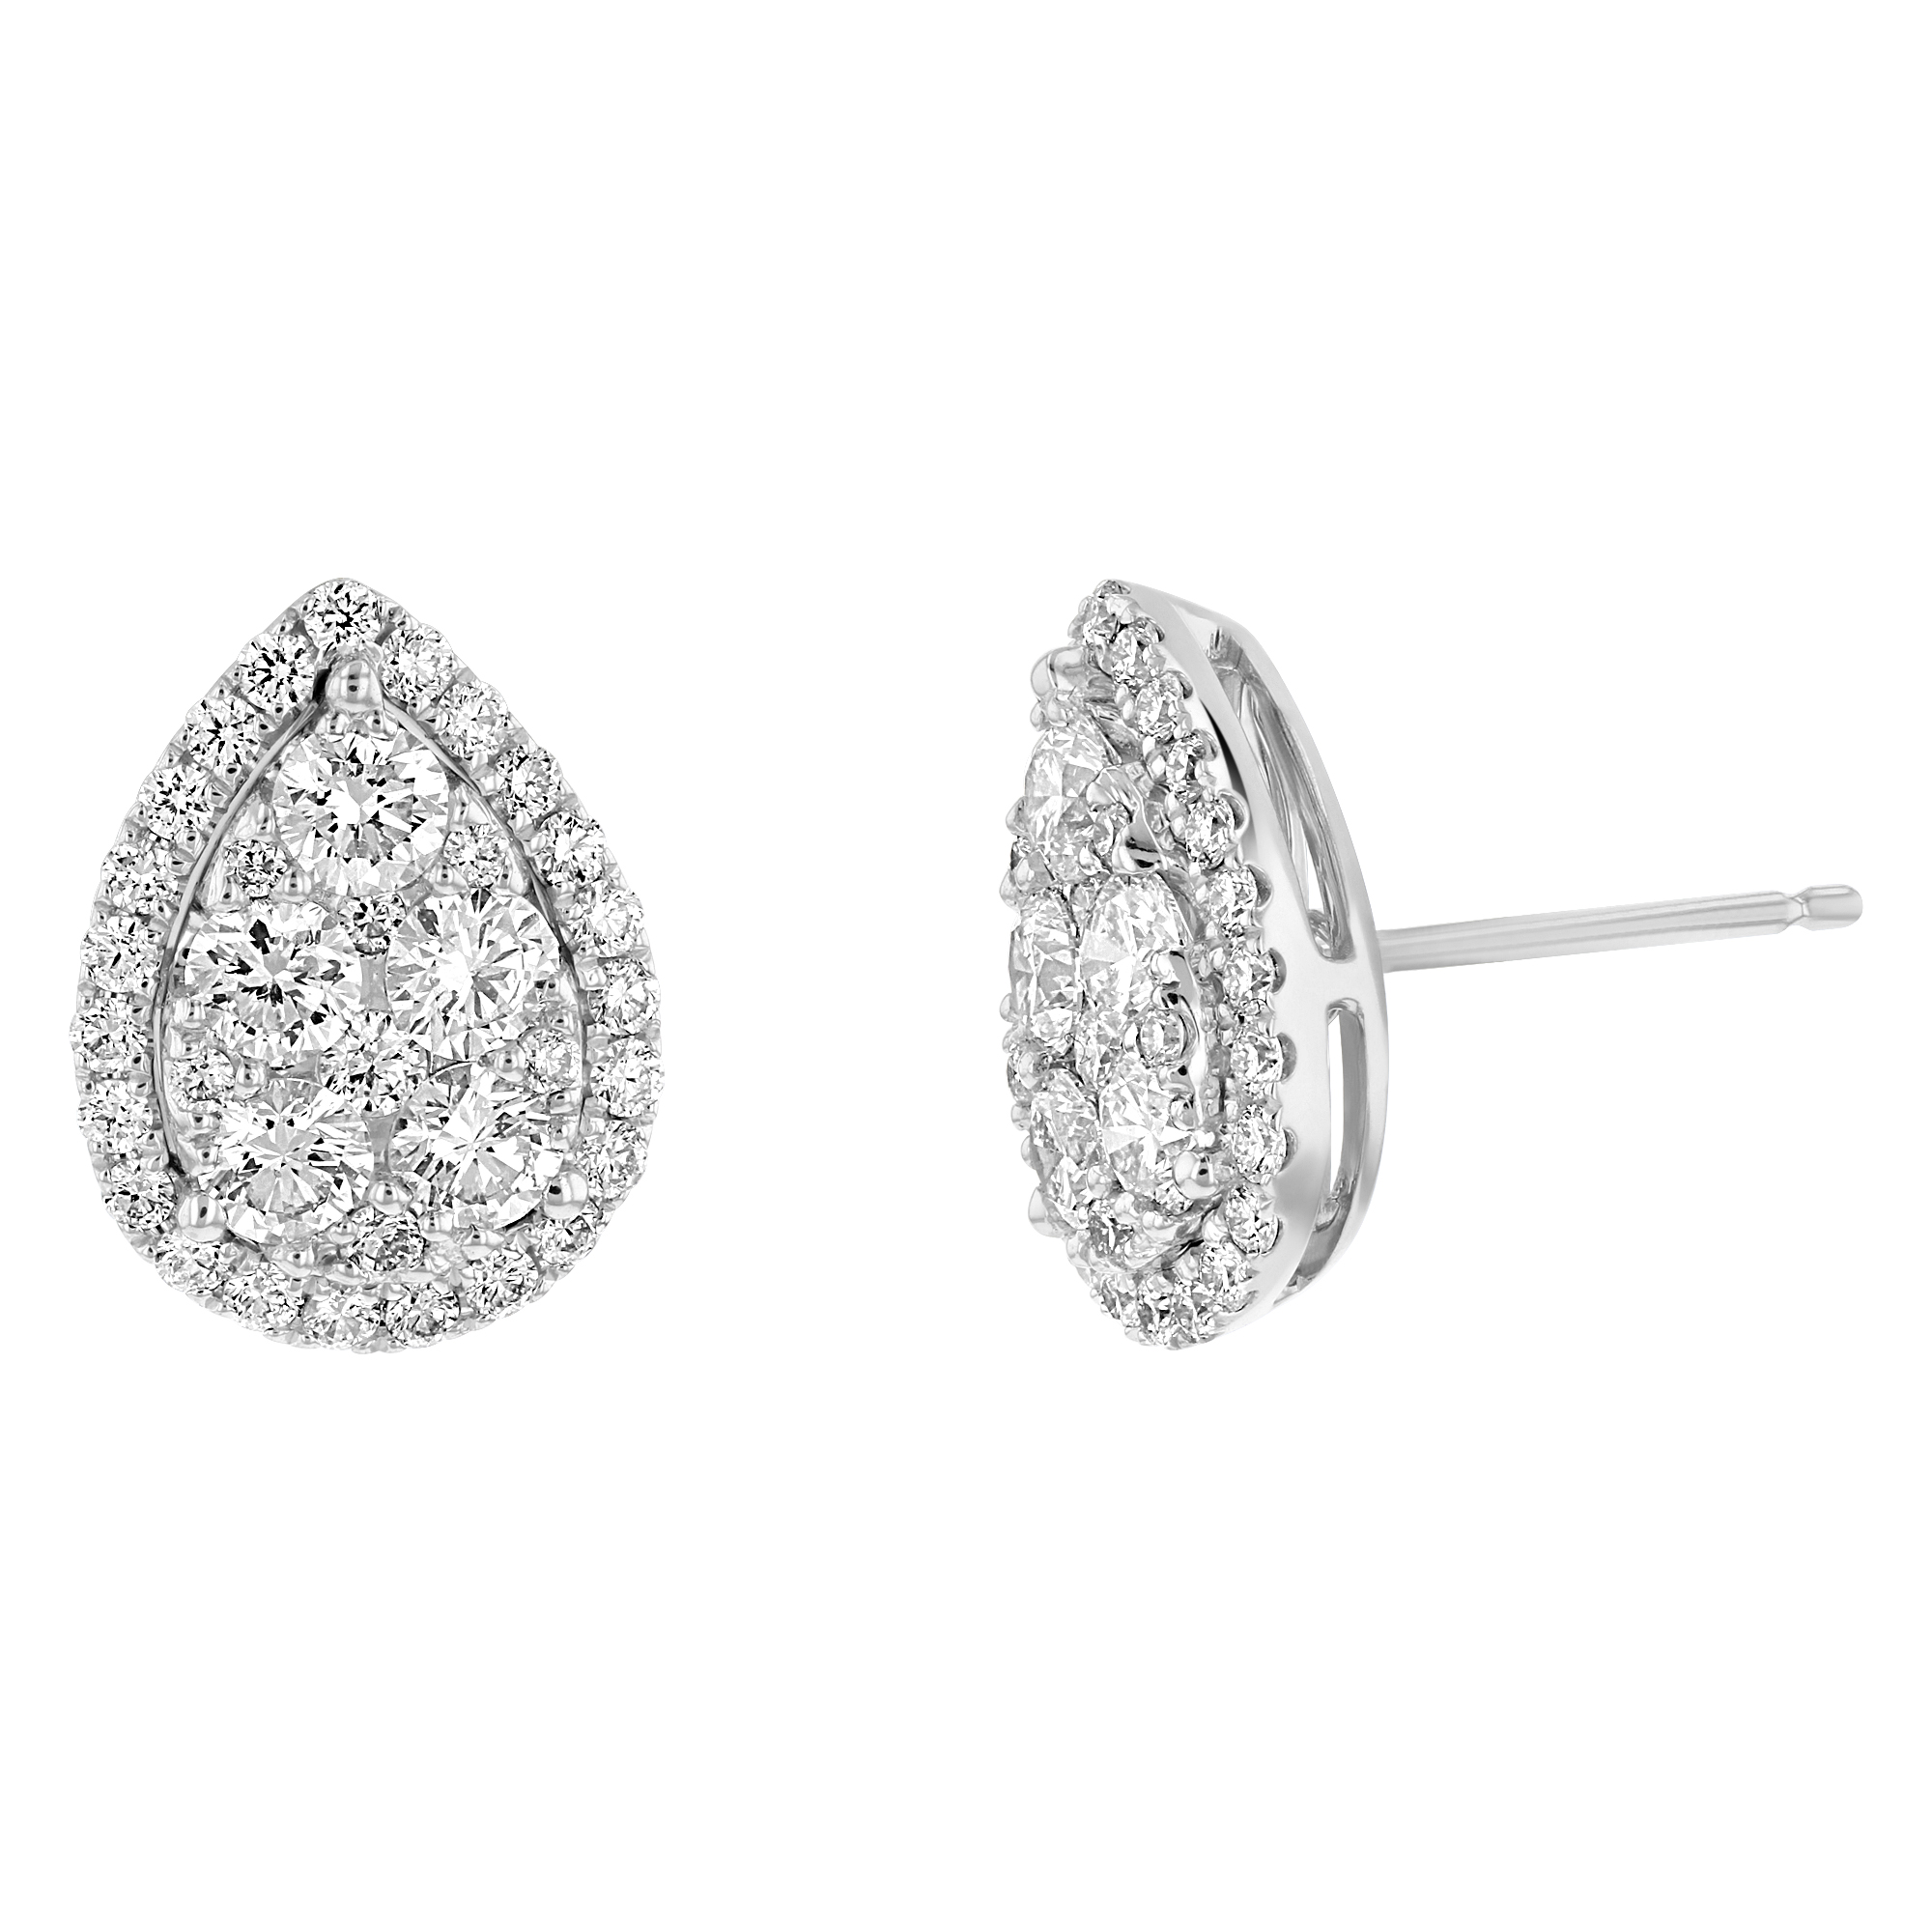 View 1.49ctw Diamond Pear Shaped Cluster Earring in 18k White Gold